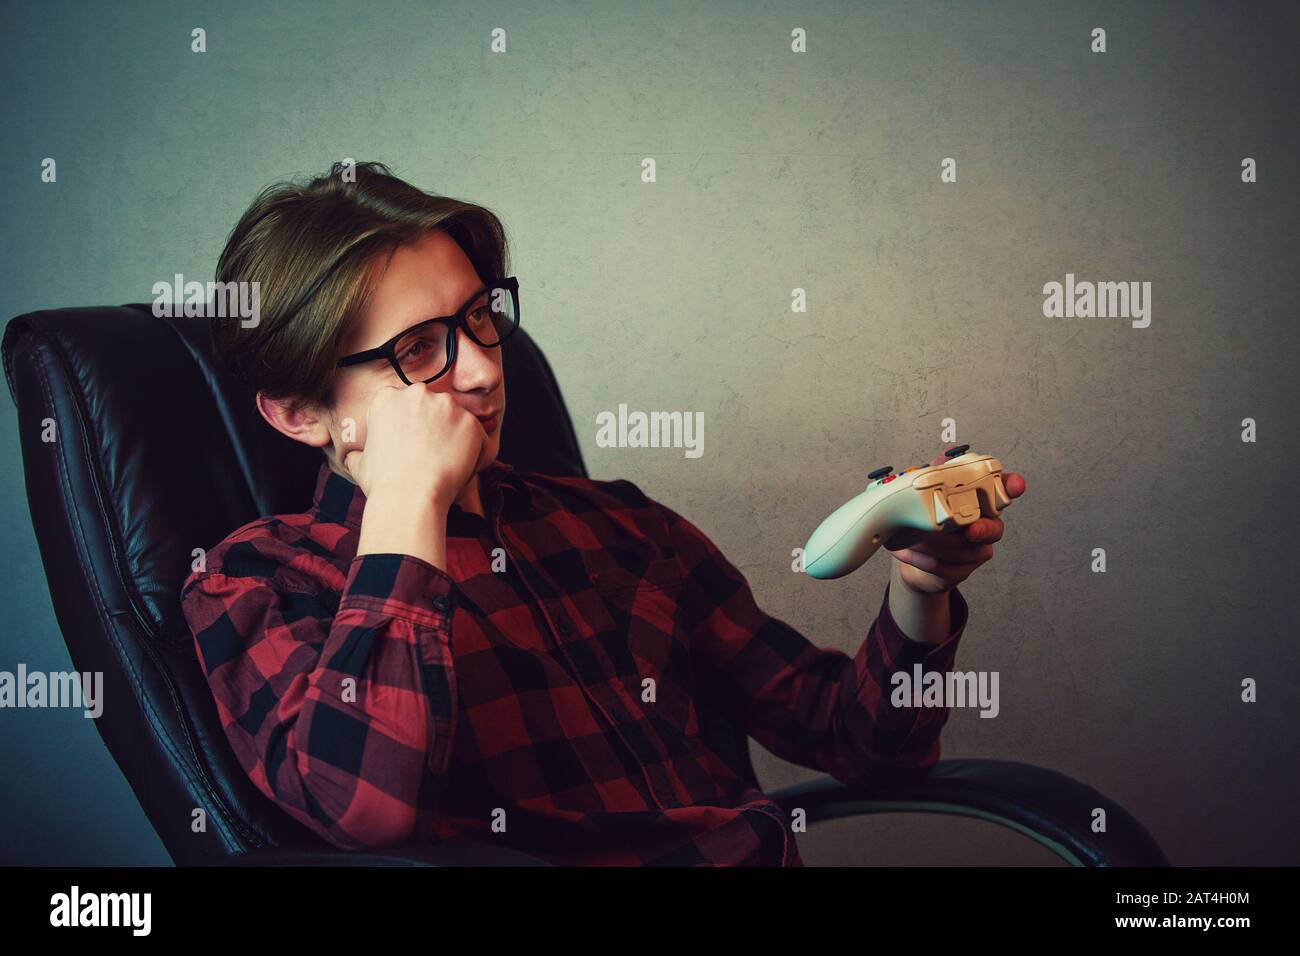 Bored adolescent boy seated in his armchair late night playing video games inside a dark room background. Sleepy boy holding joystick console, being i Stock Photo